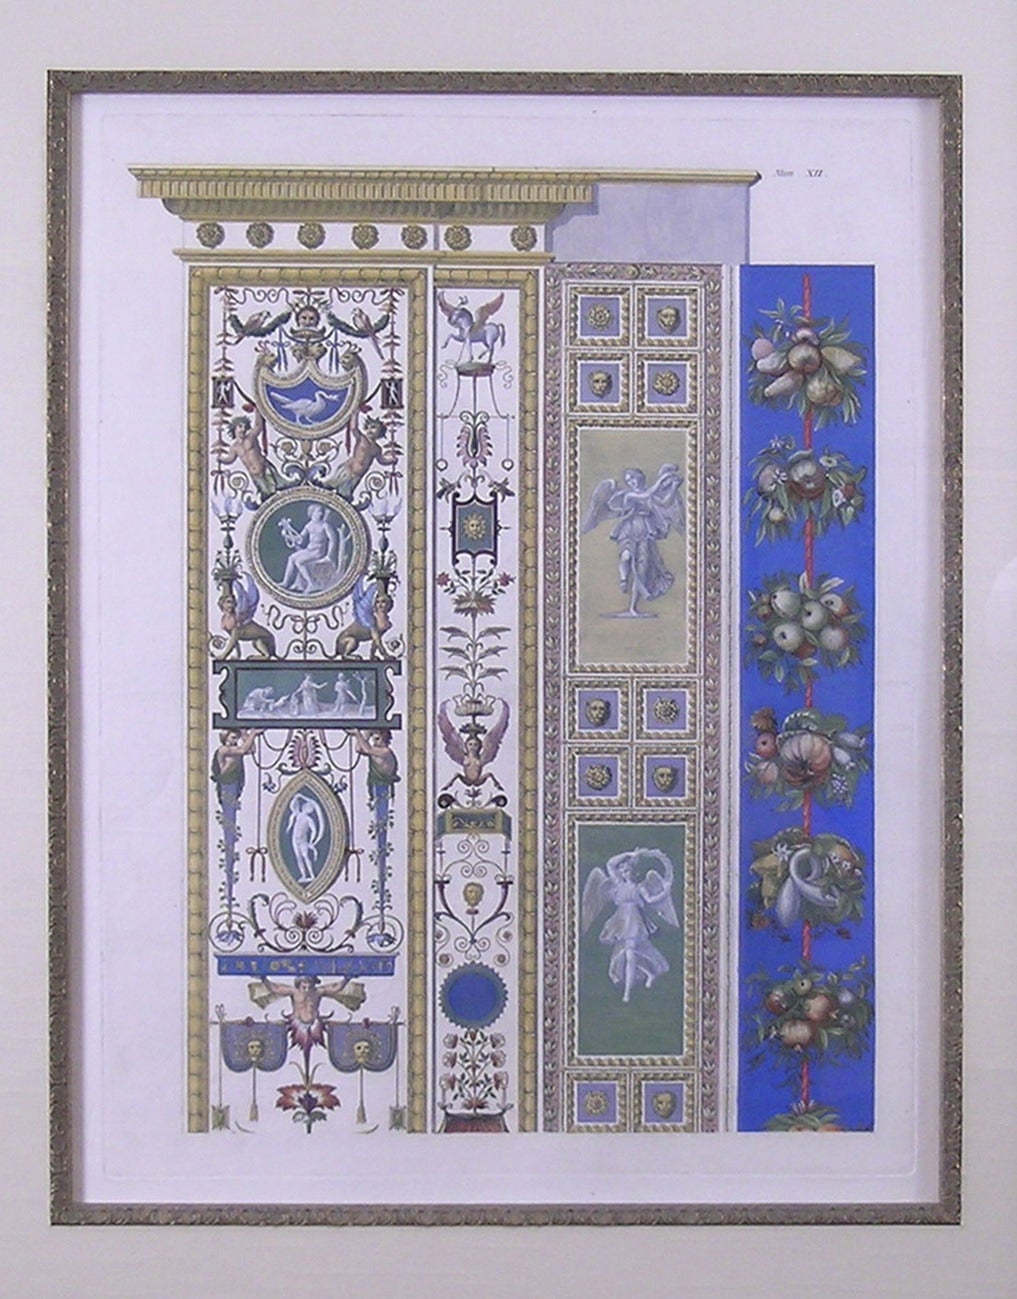 Raphael's Loggia  Plate XII. Pilaster Bottom. Priced as a pair with Pilaster Top - Academic Print by Gaetano Savorelli